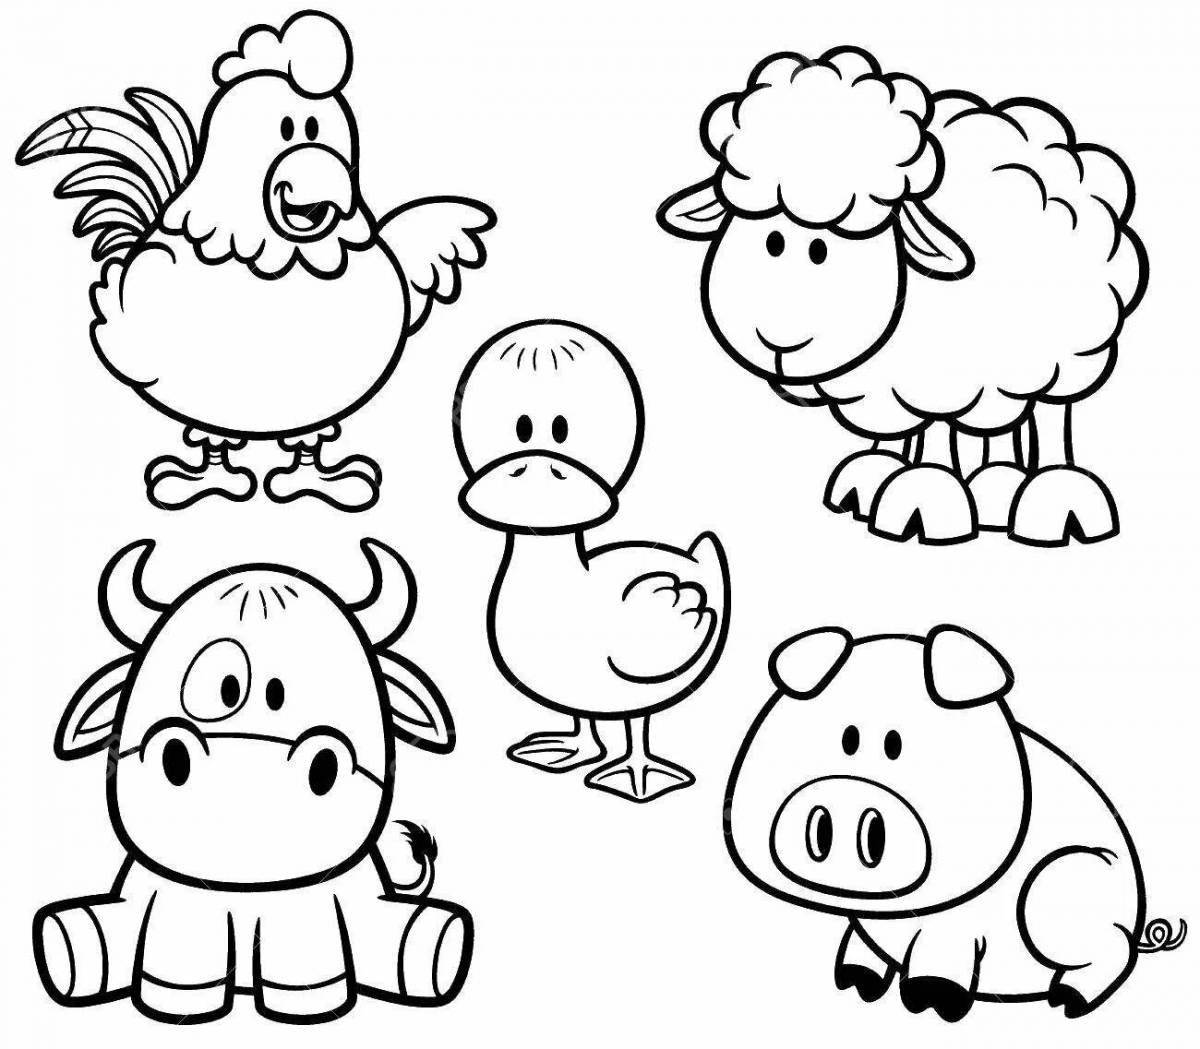 Funny animal coloring pages for kids 3 4